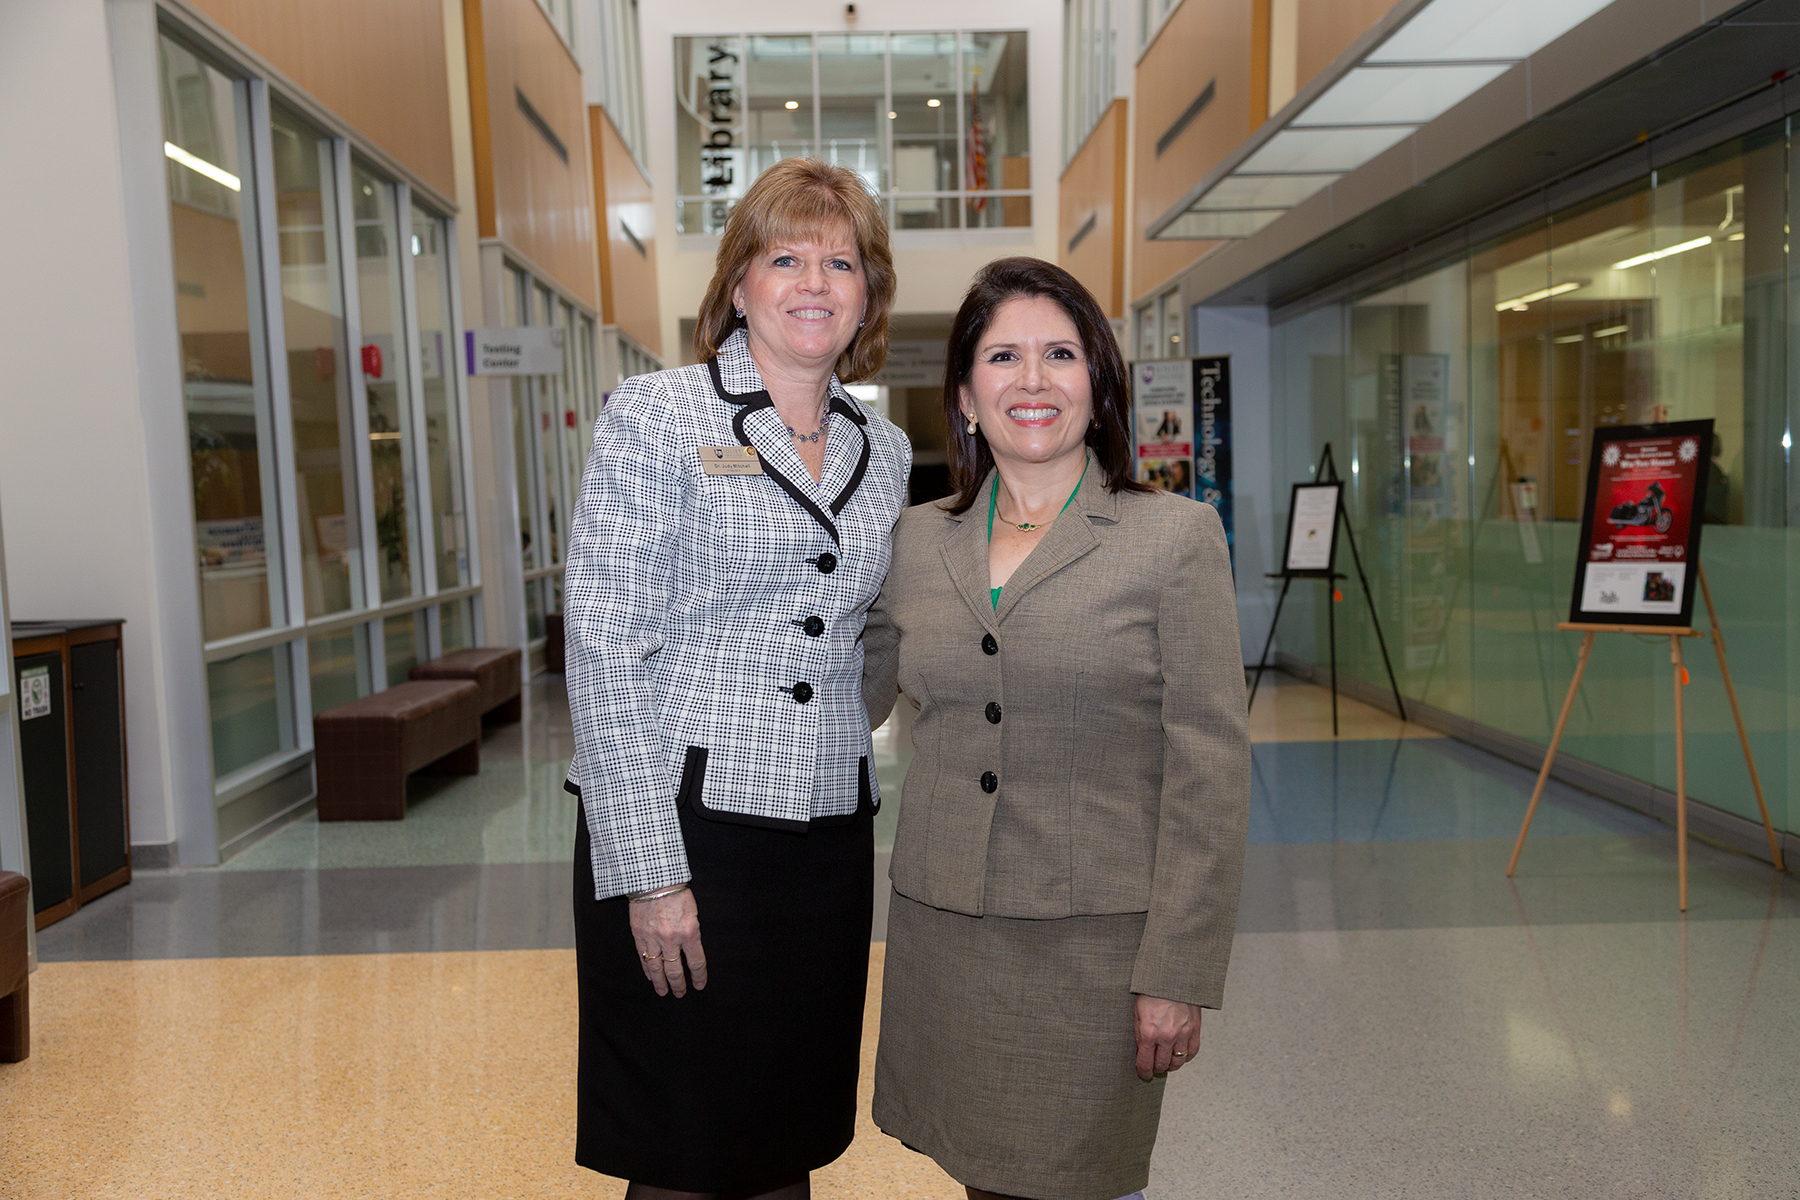 From Left: JJC President Dr. Judy Mitchell and Illinois Lt. Governor Evelyn Sanguinetti